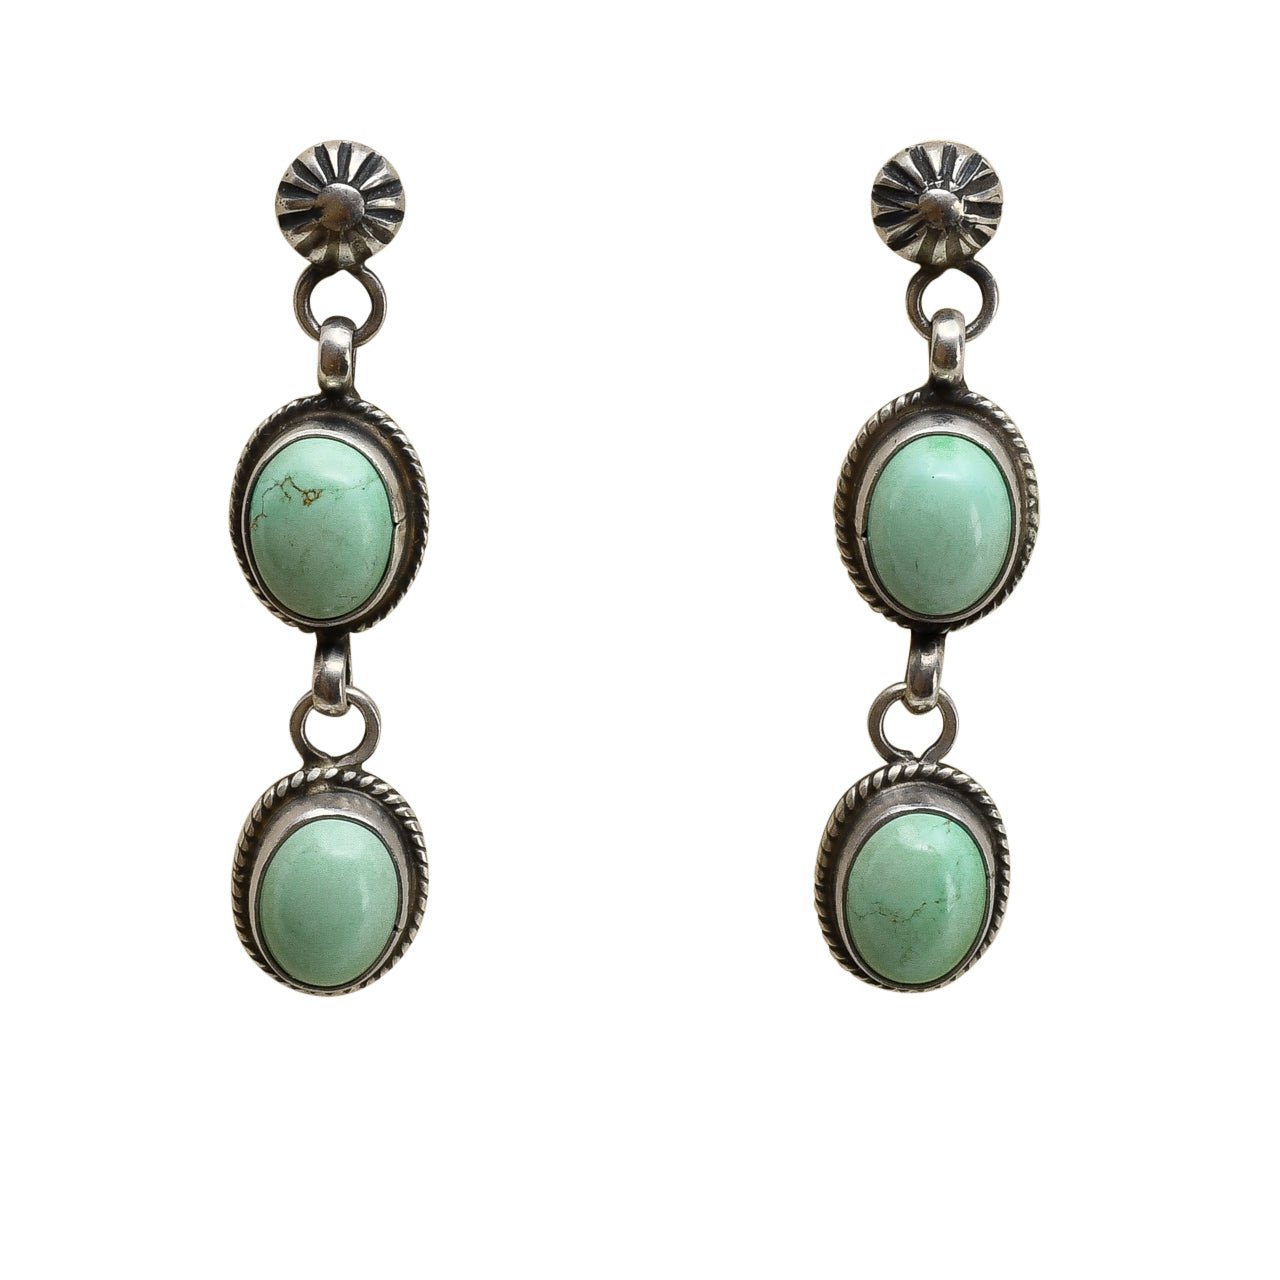 Traditional Navajo Turquoise and Silver Dangle Earrings - Turquoise & Tufa